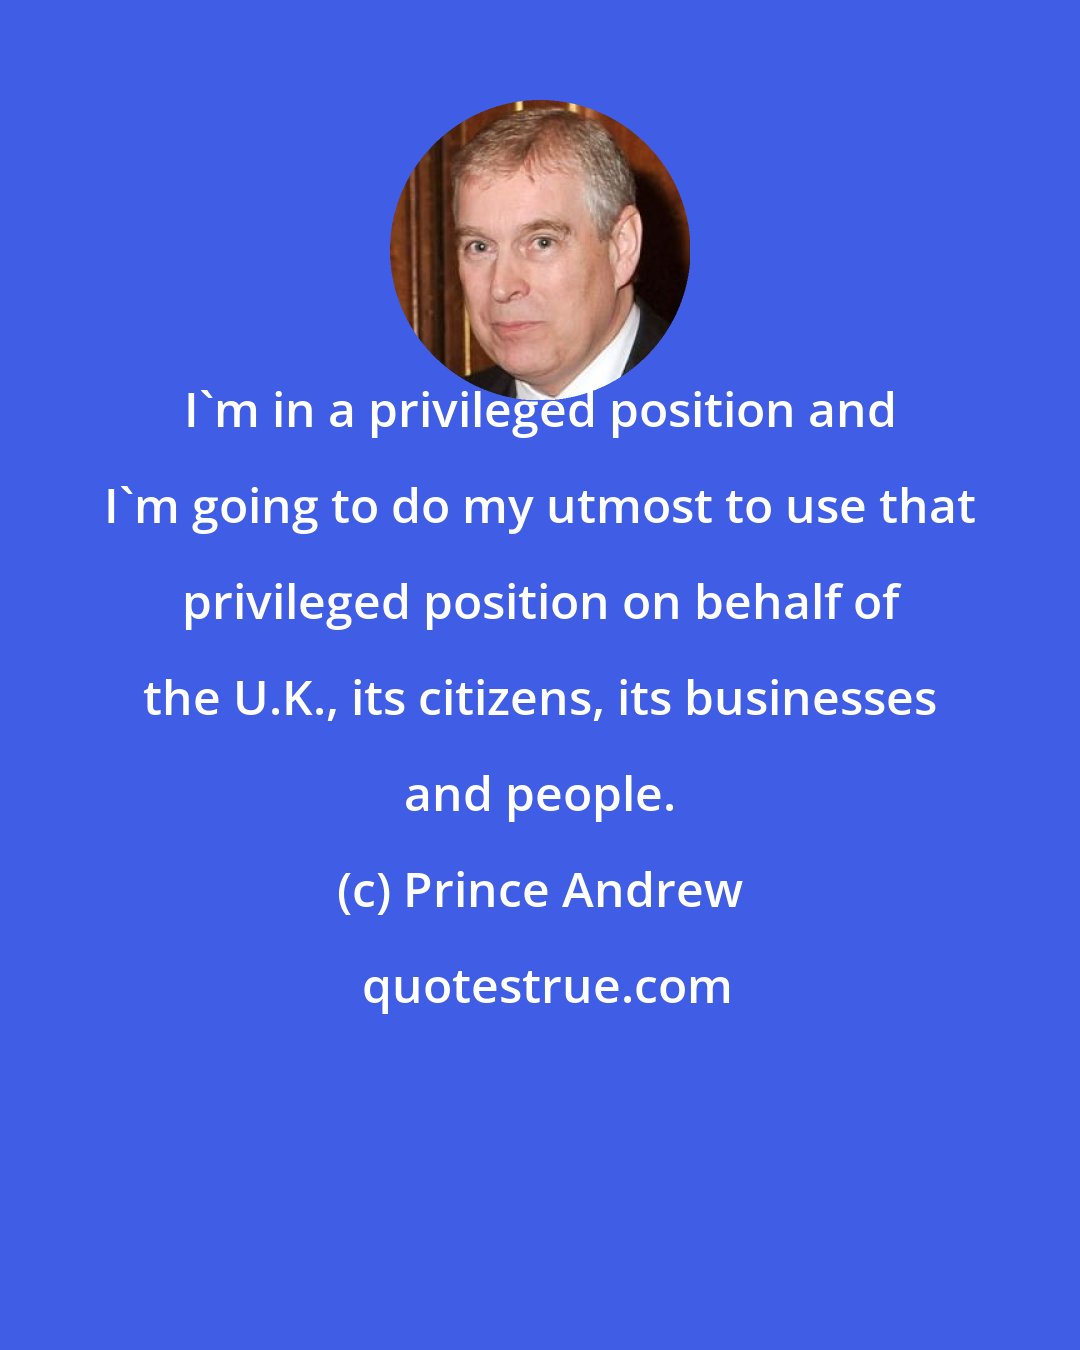 Prince Andrew: I'm in a privileged position and I'm going to do my utmost to use that privileged position on behalf of the U.K., its citizens, its businesses and people.